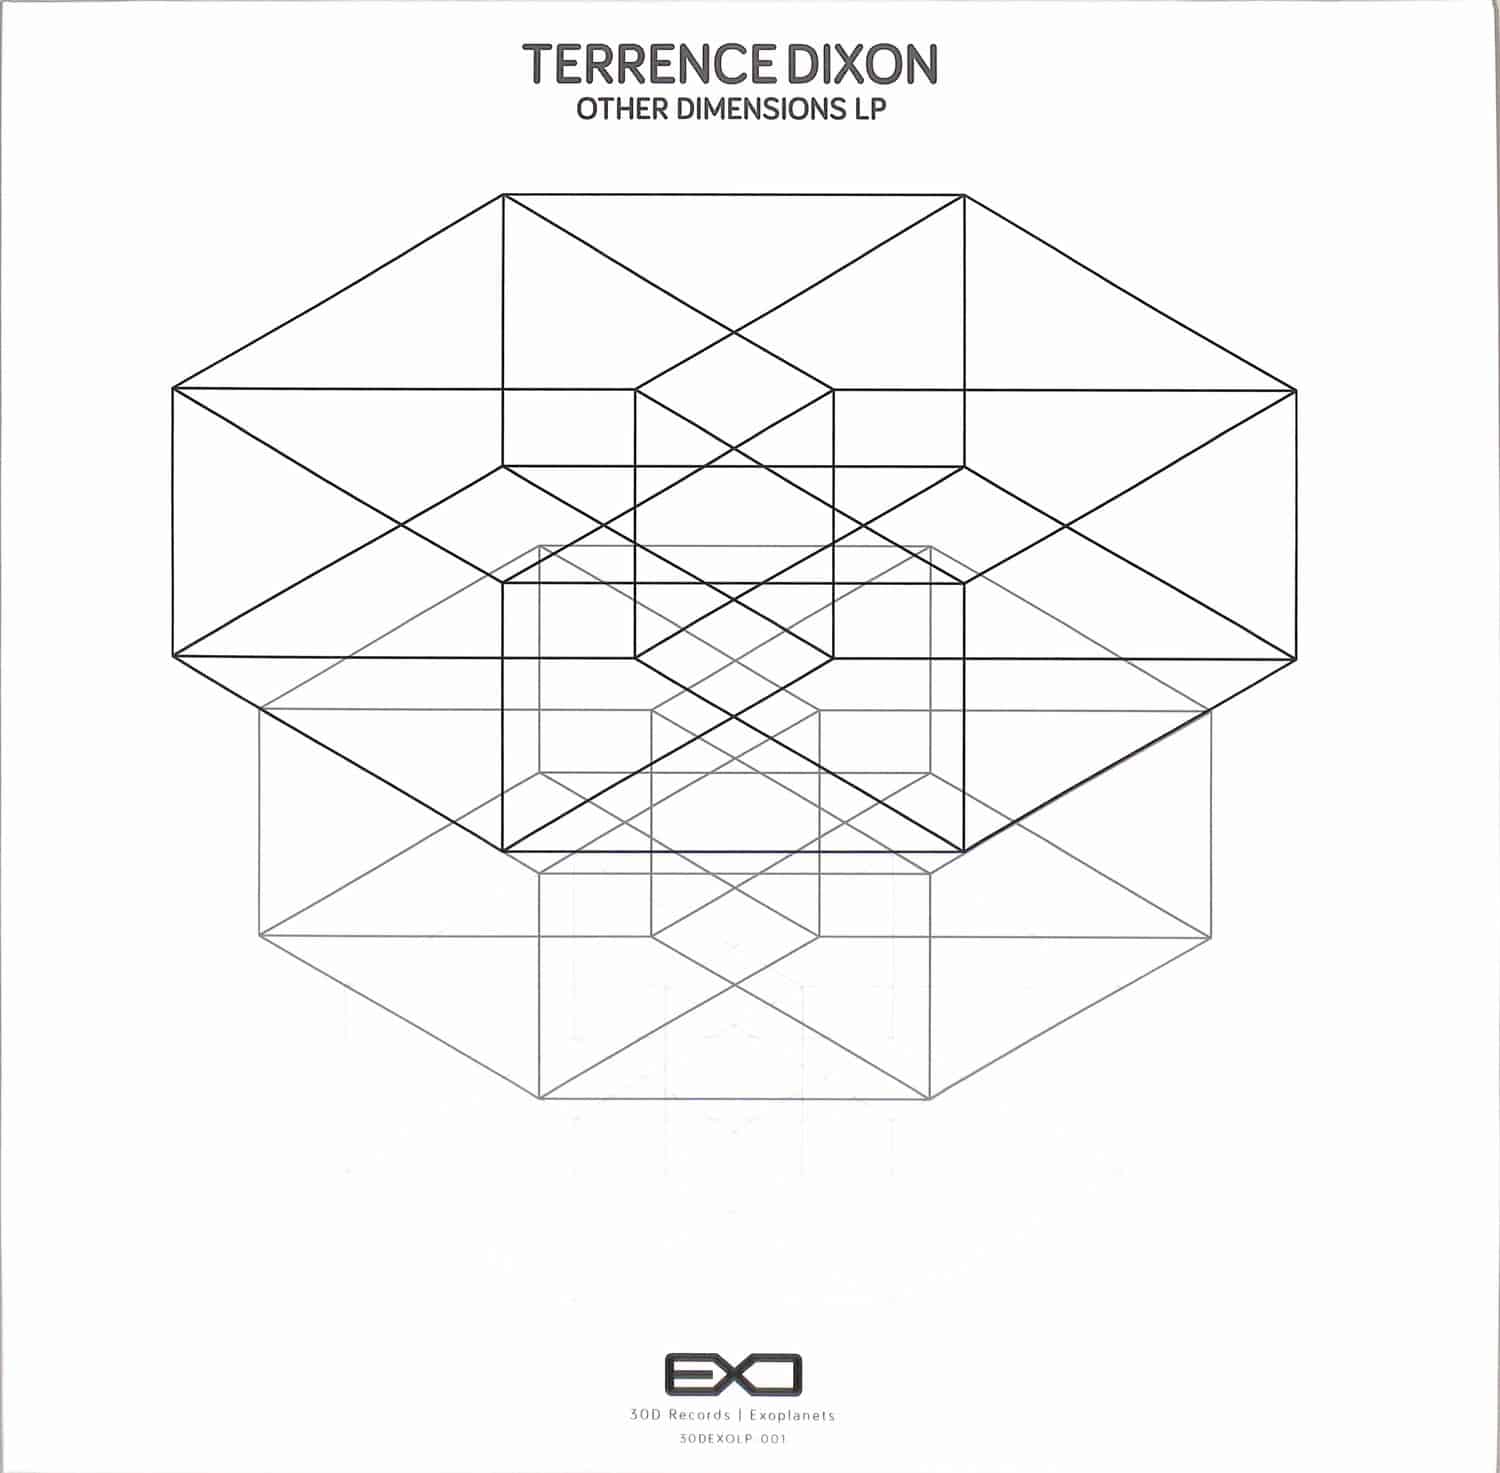 Terrence Dixon - OTHER DIMENSIONS 